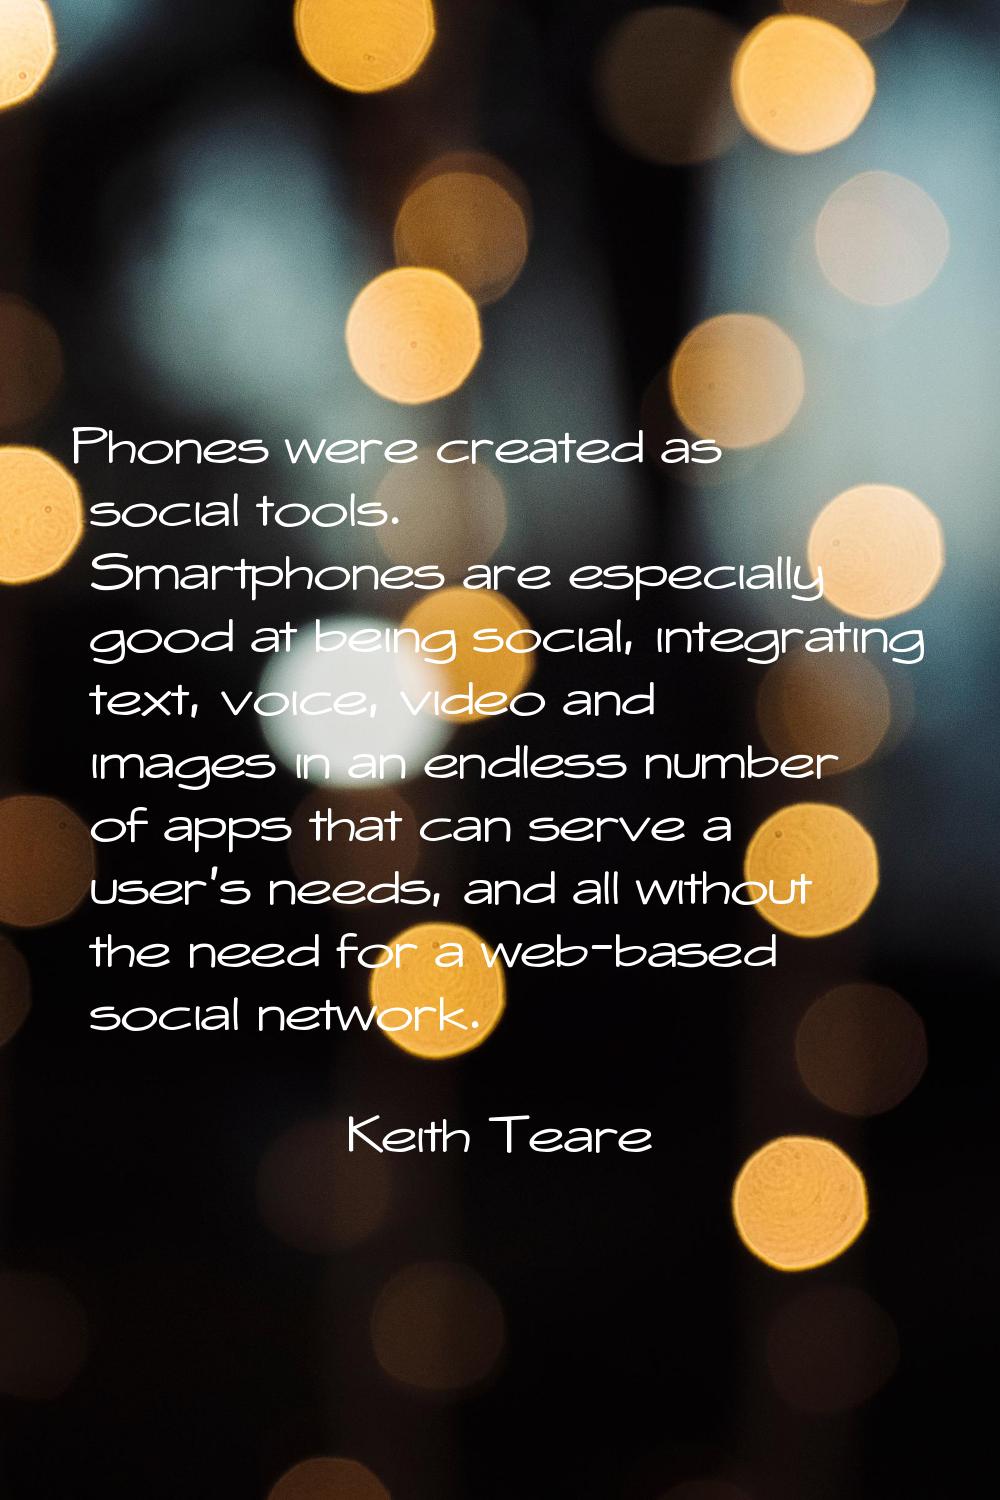 Phones were created as social tools. Smartphones are especially good at being social, integrating t